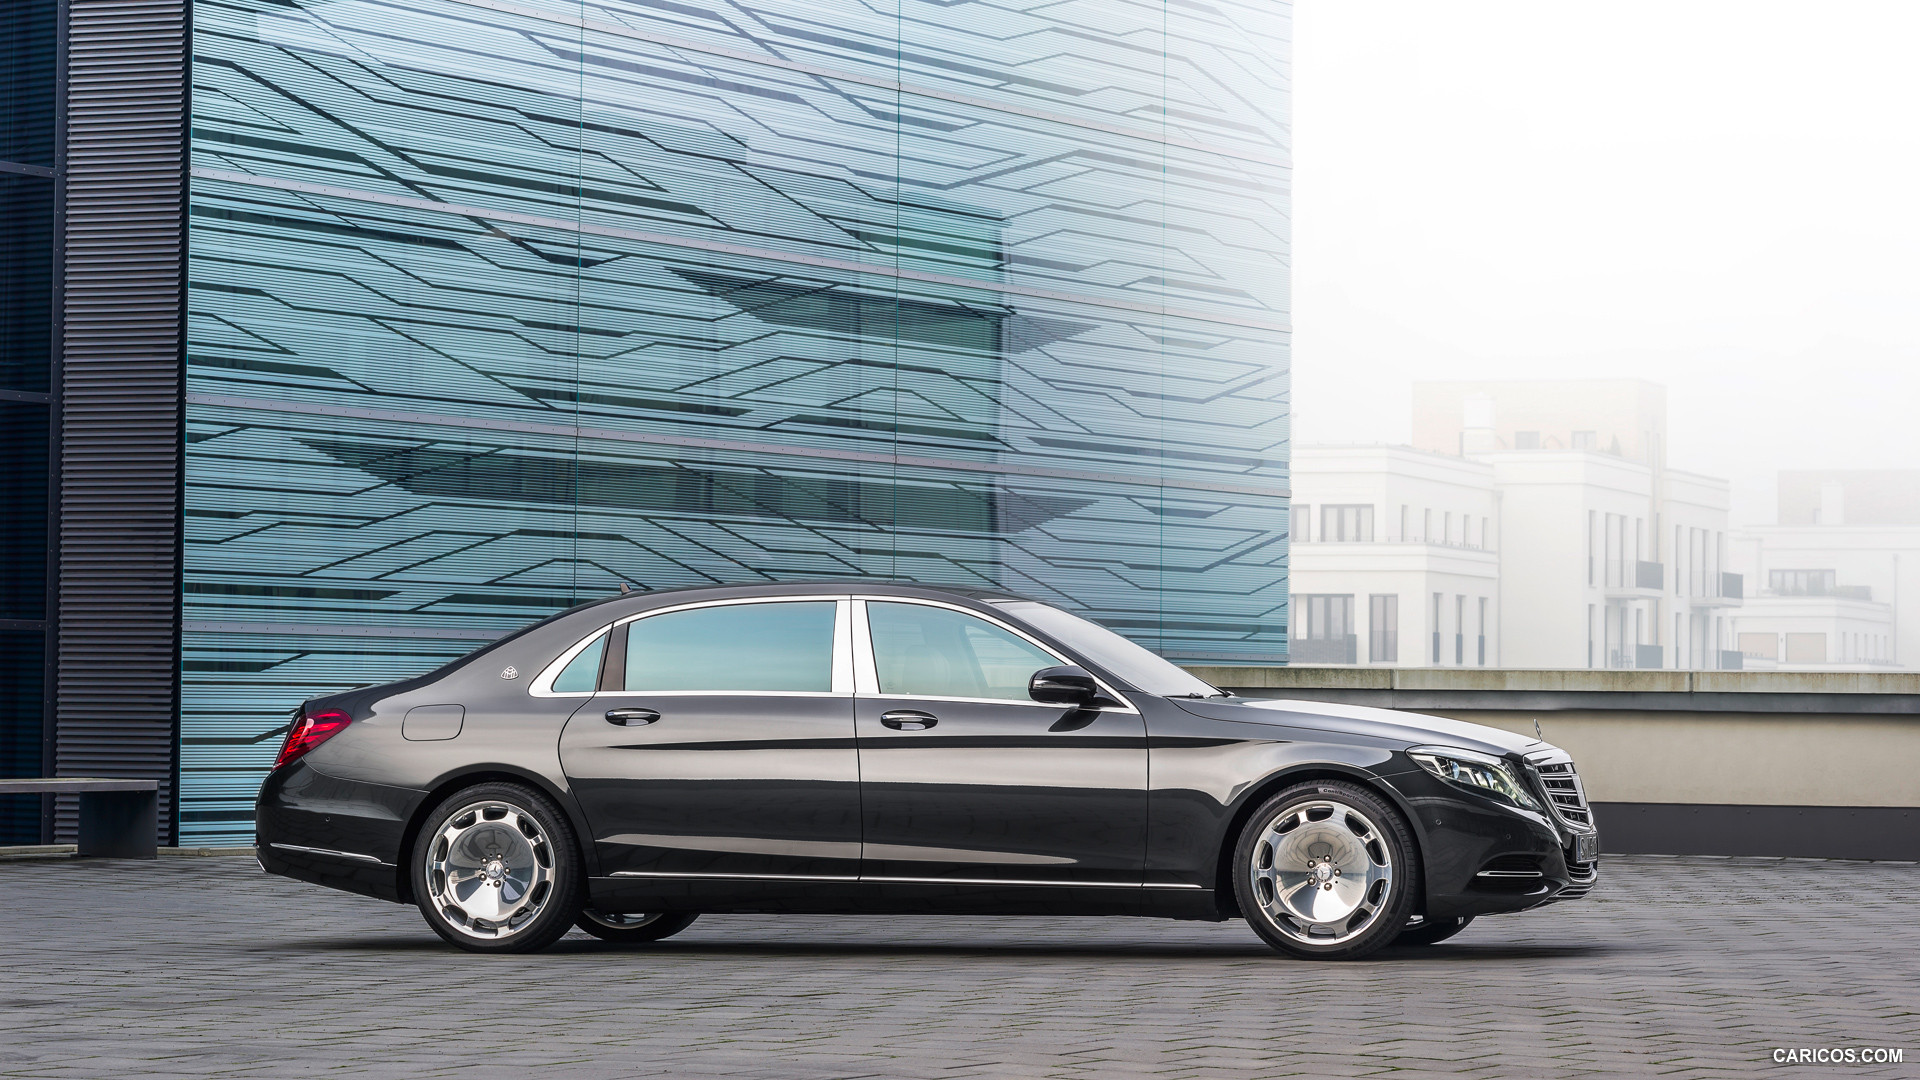 2016 Mercedes-Maybach S-Class S600 - Side, #4 of 225